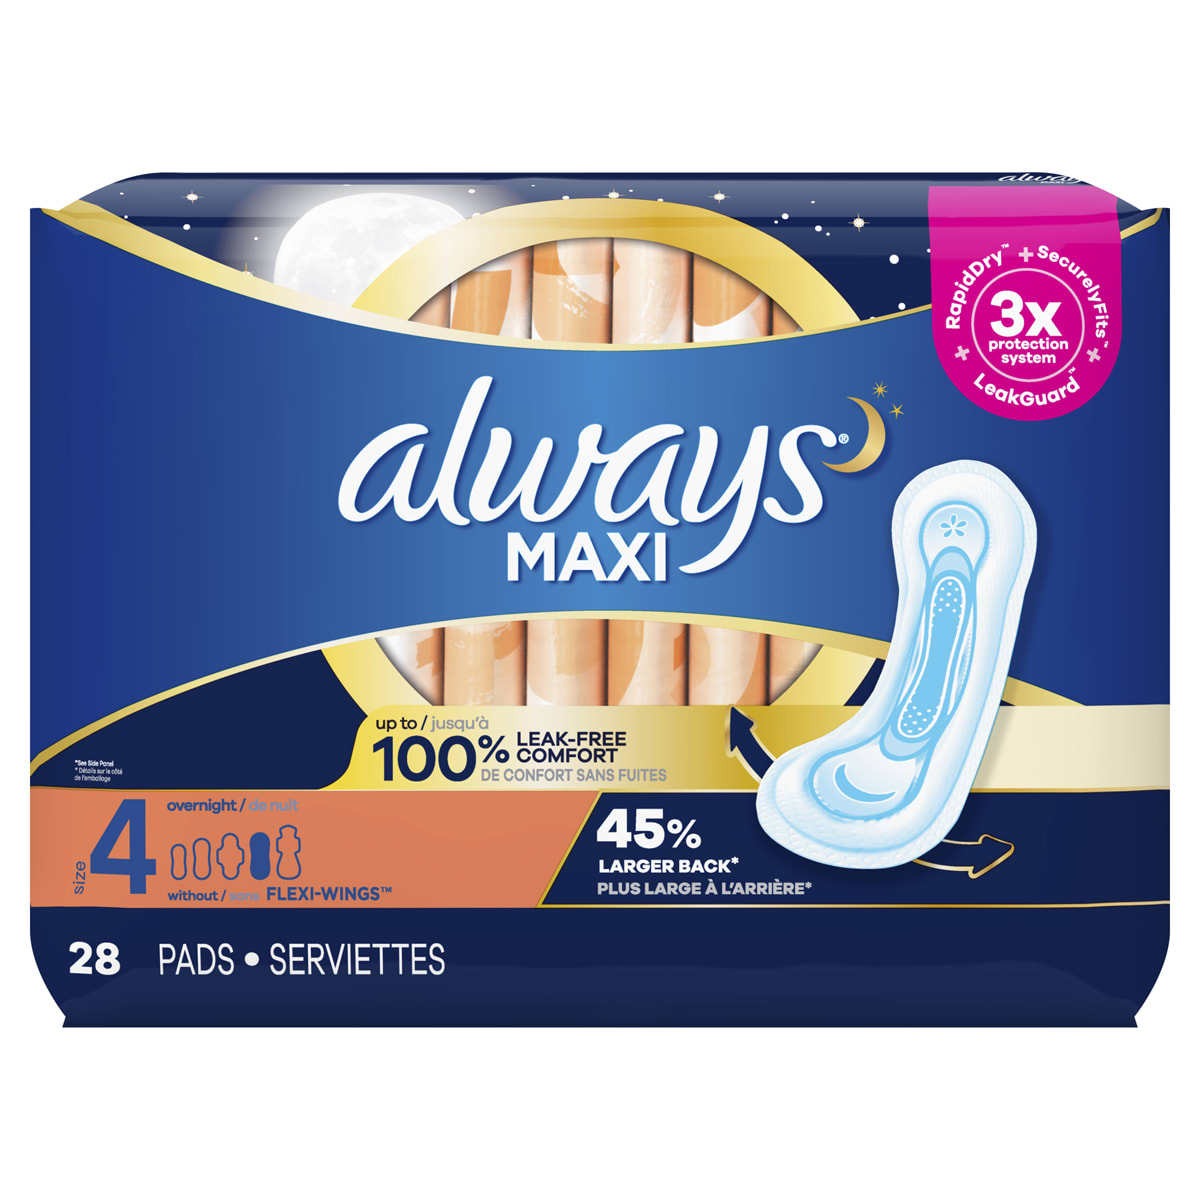 HSA Eligible  Stayfree Maxi Pads Overnight with Wings, 28 ct. (3